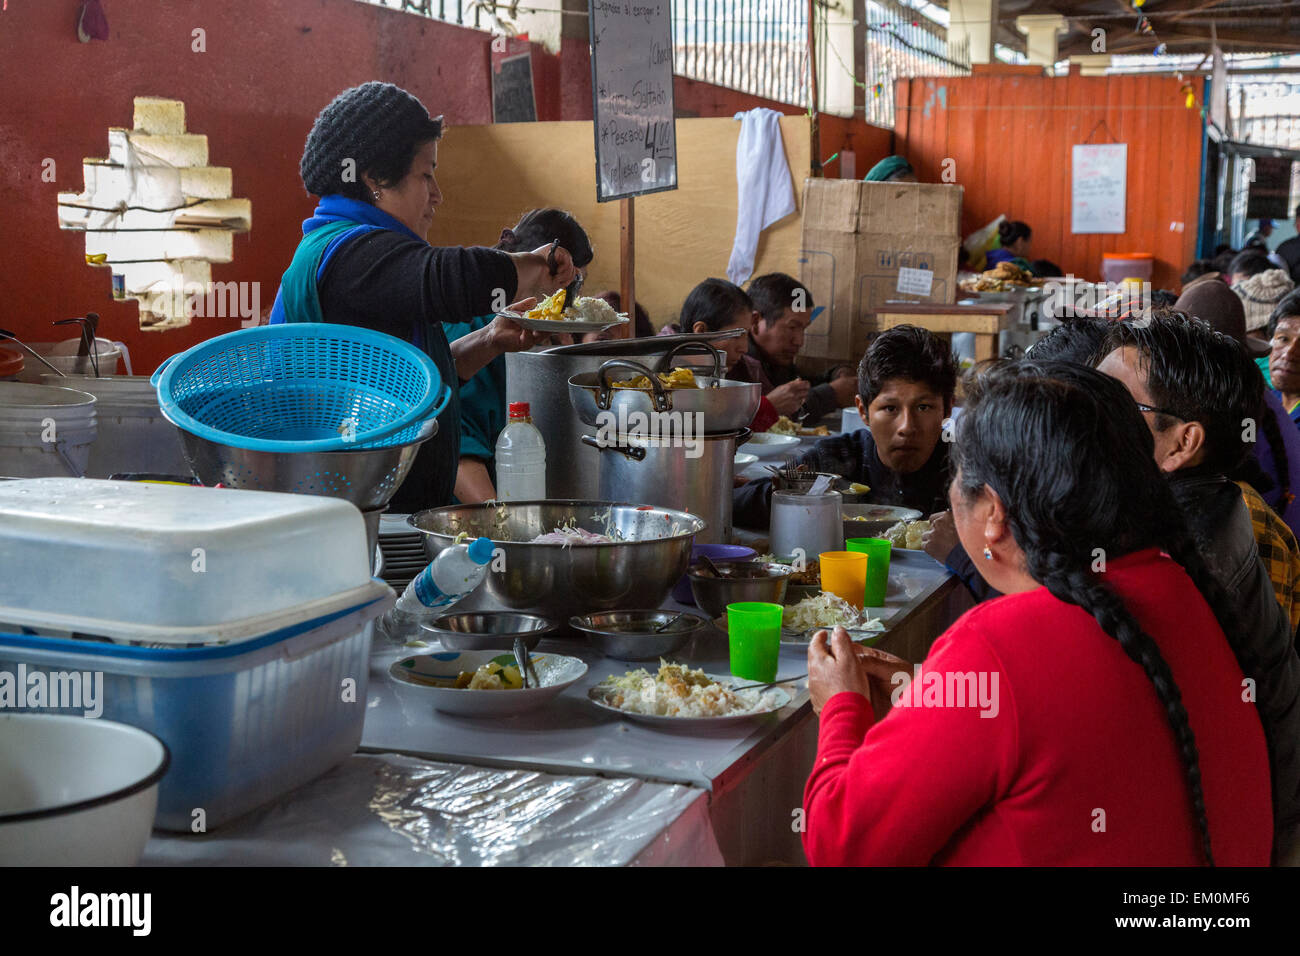 Peru, Cusco, San Pedro Market.  People Eating in the Food Court Area of the Market. Stock Photo